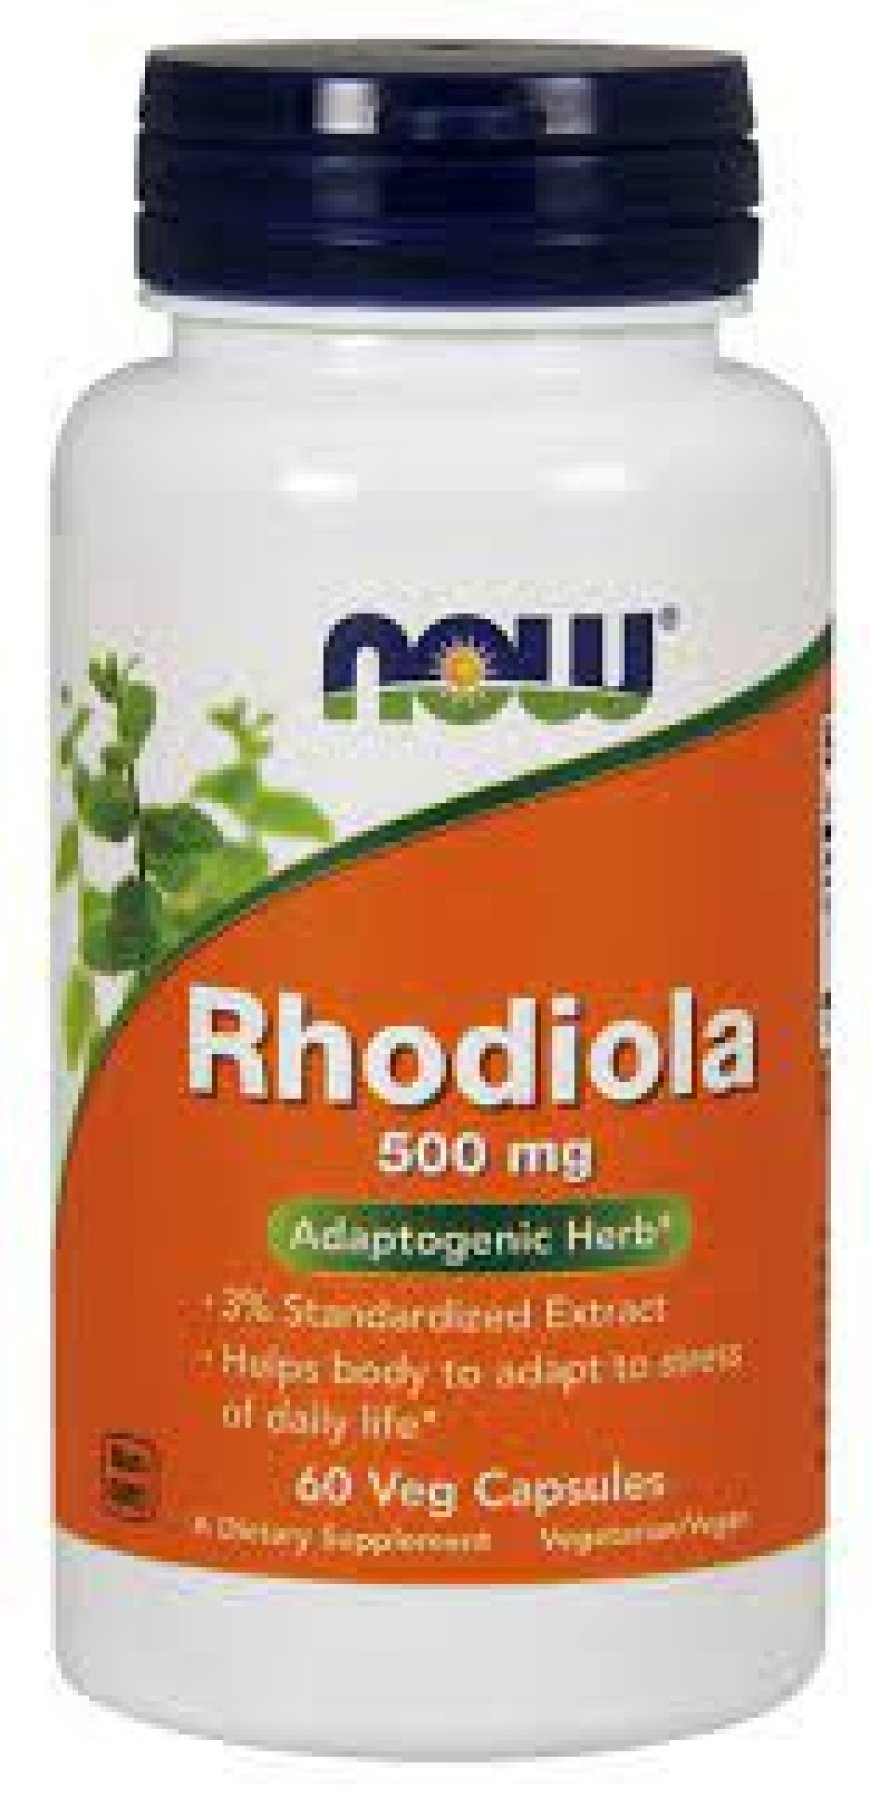 Rhodiola Rosea: A Natural Remedy for Anxiety and Stress?